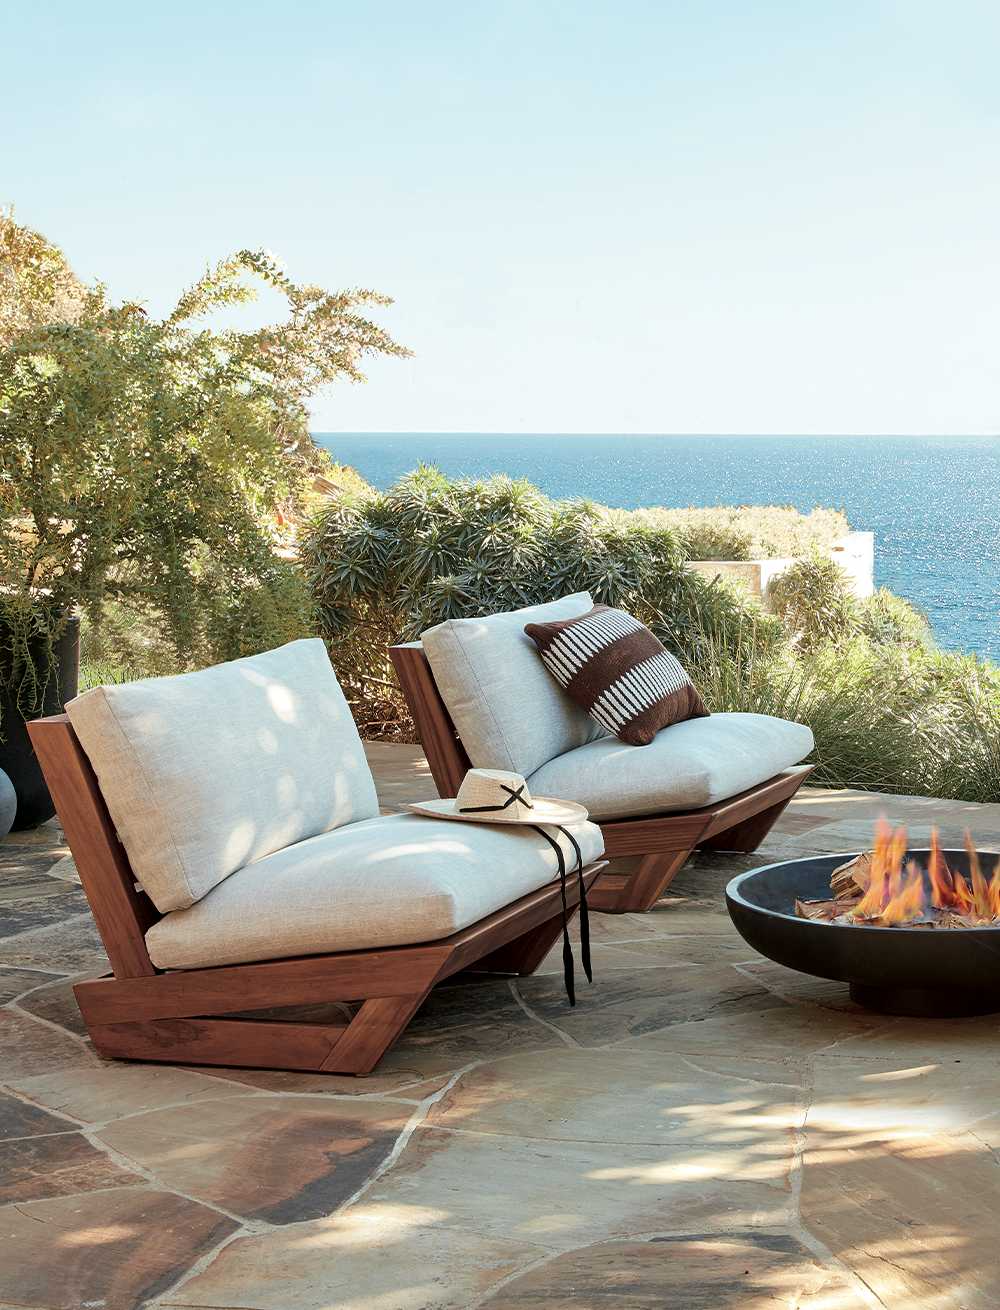 Contemporary Patio Furniture: The Latest Trends and Styles for Outdoor Living